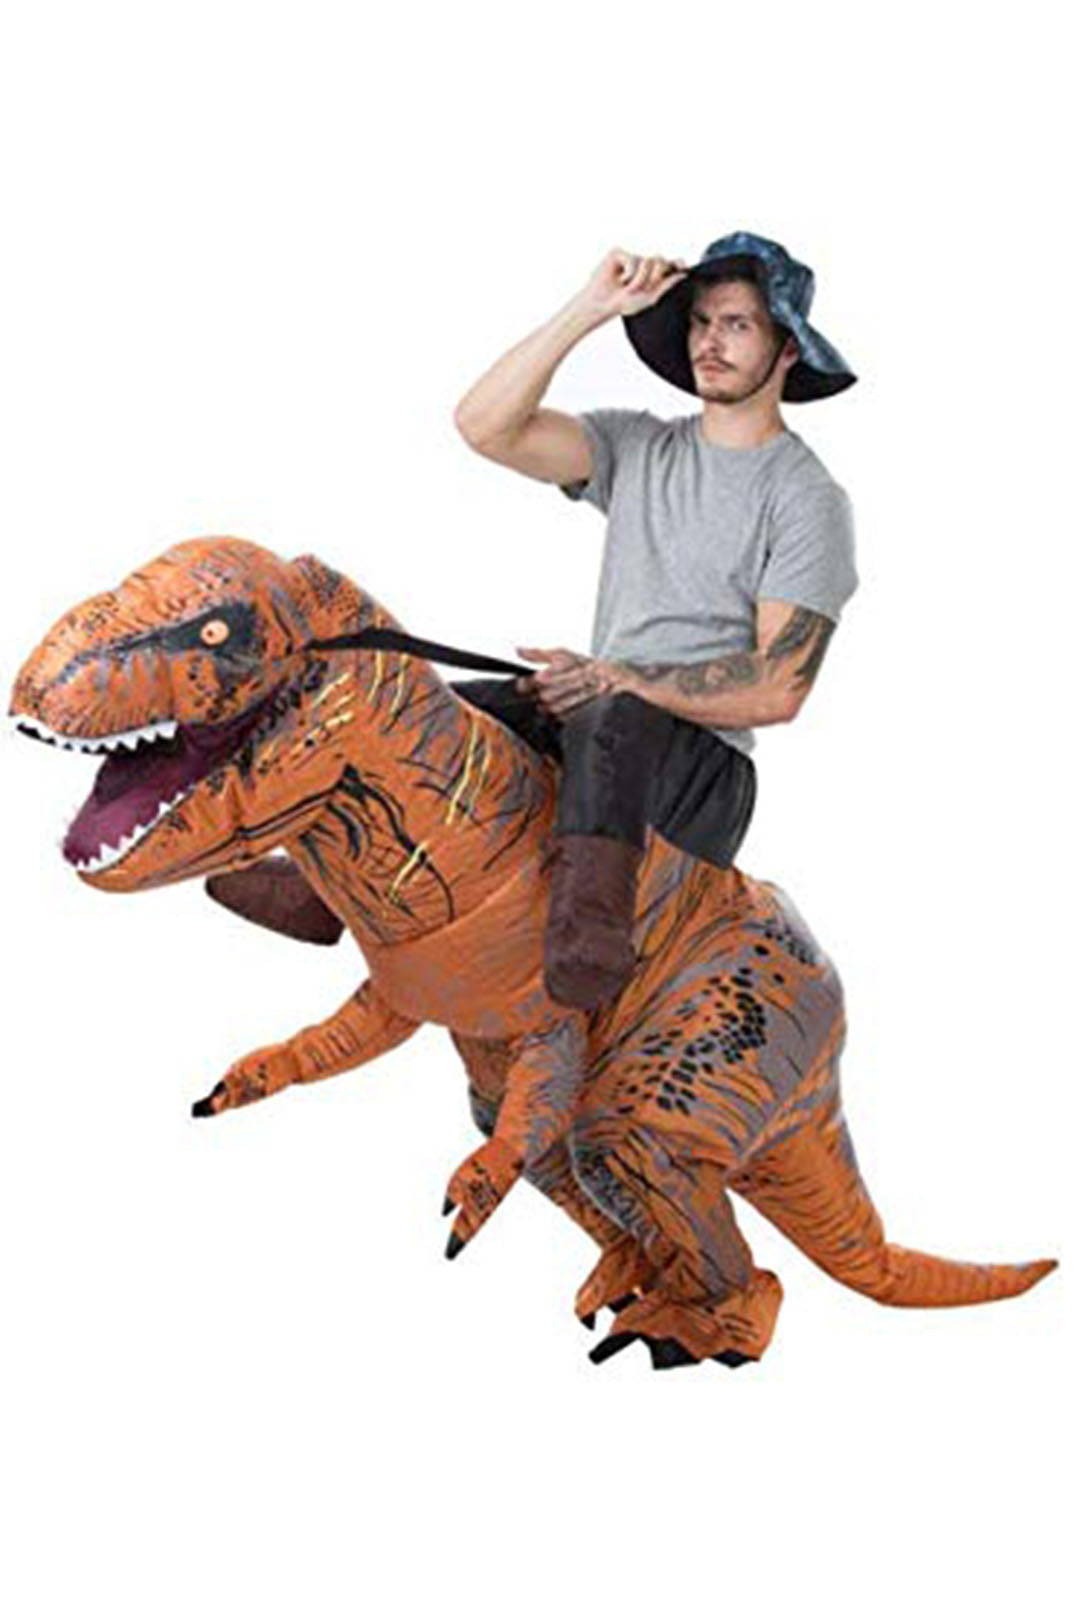 Inflatable Ride On T-Rex Costume